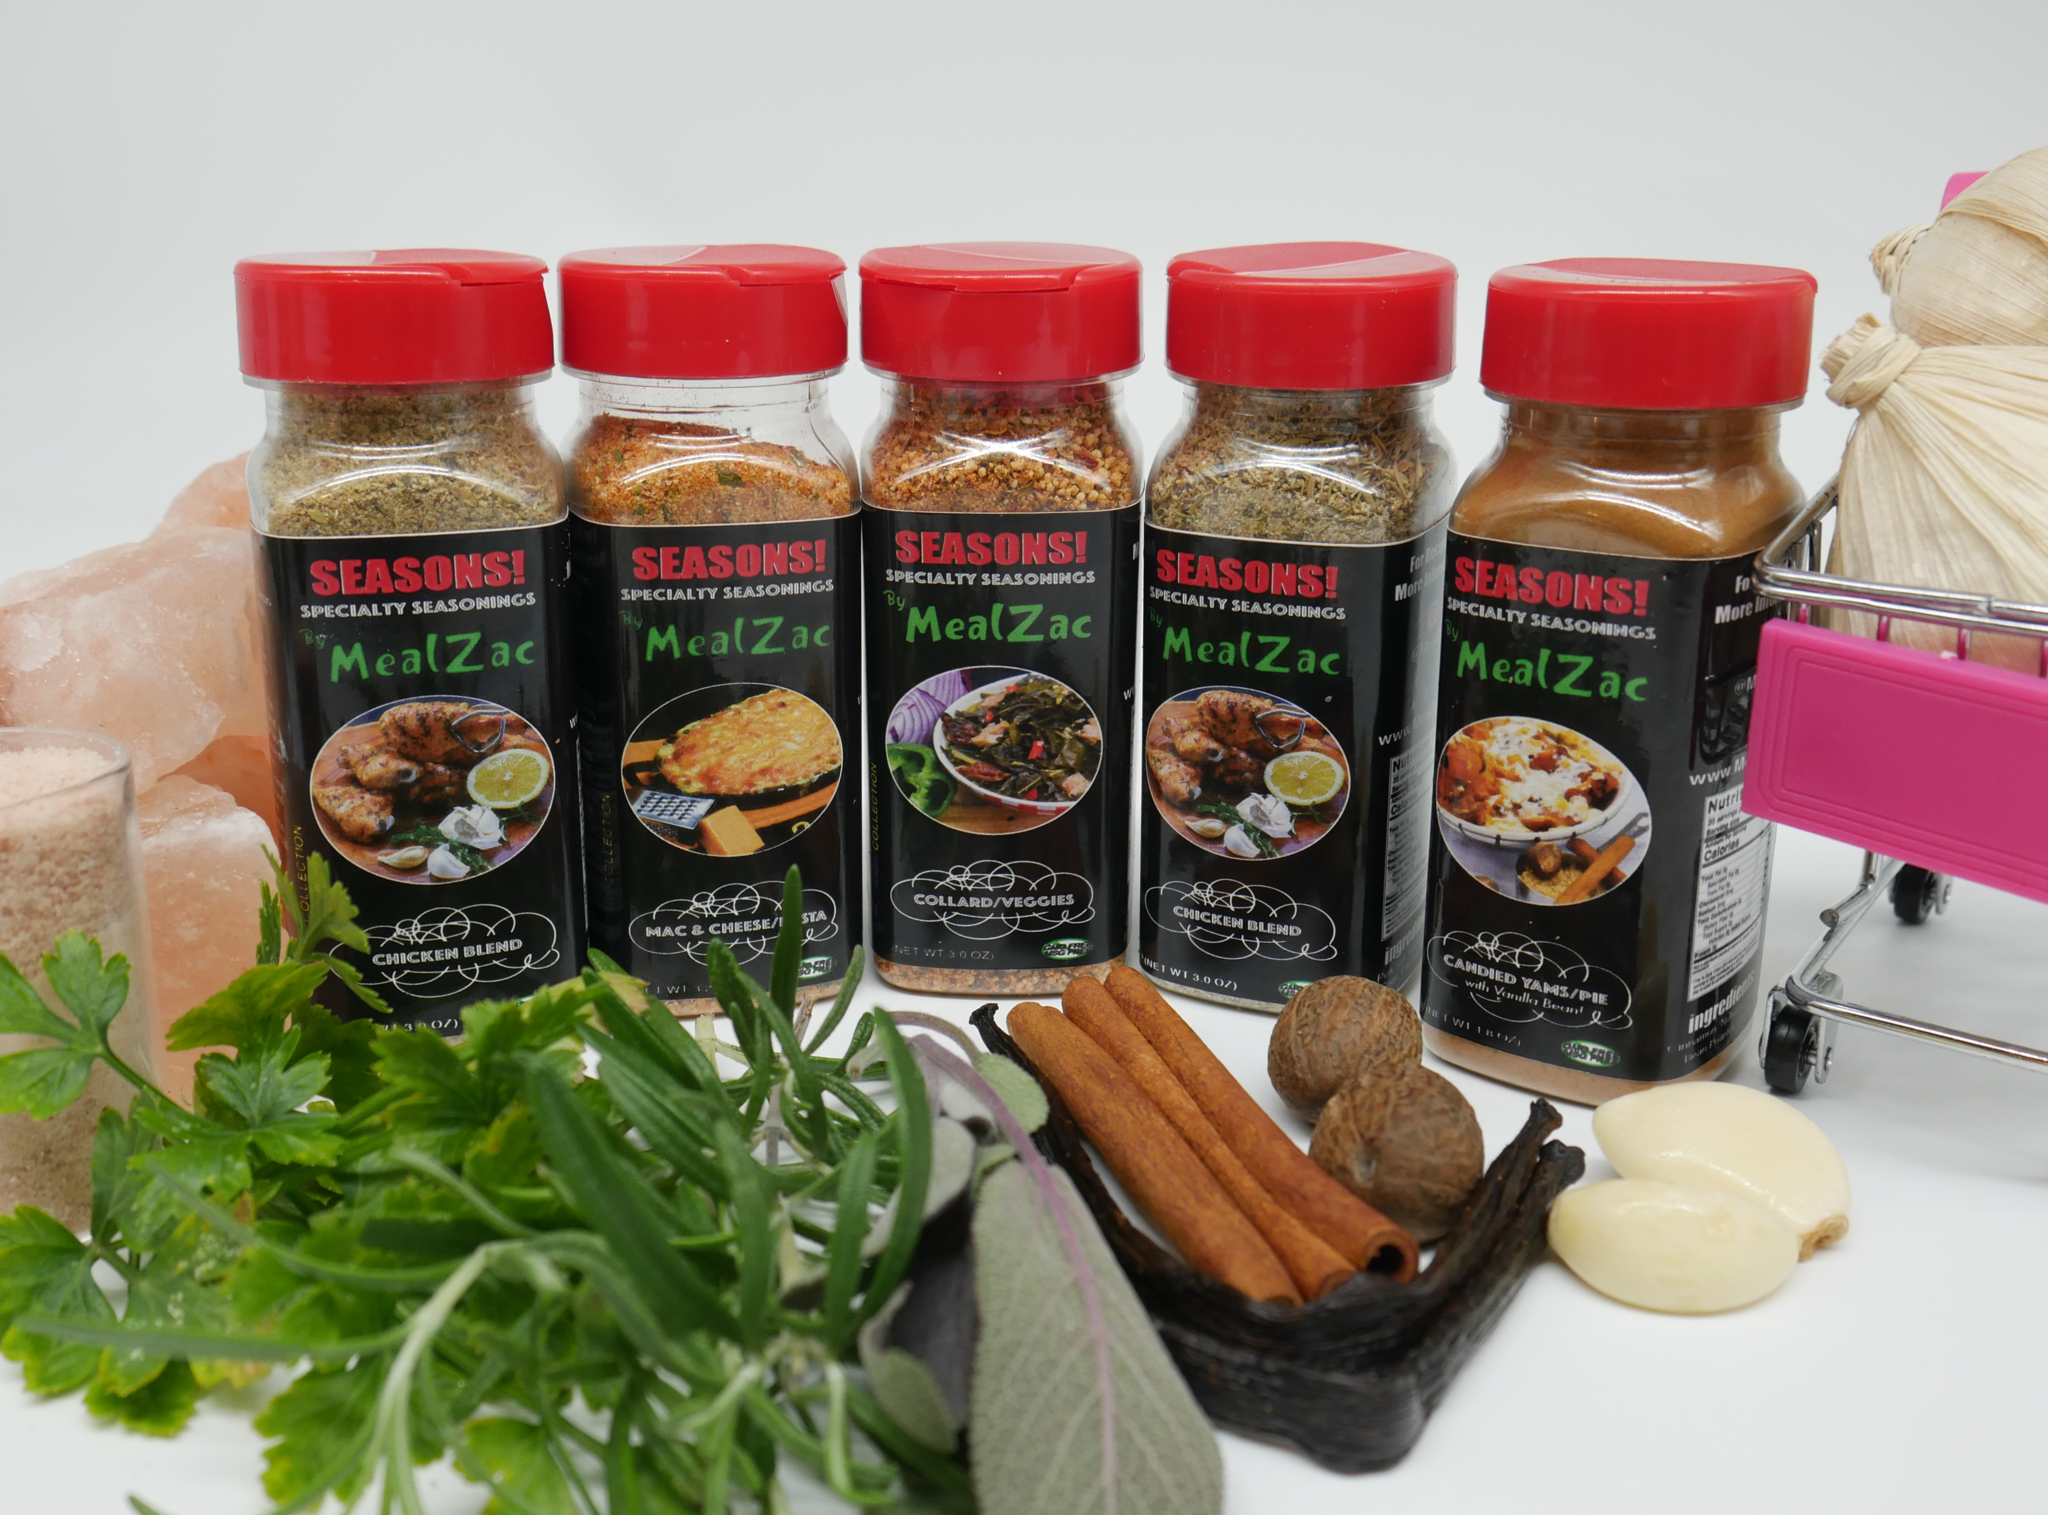 https://mealzac.com/wp-content/uploads/2020/08/Seasonings-Food-Products-02.png